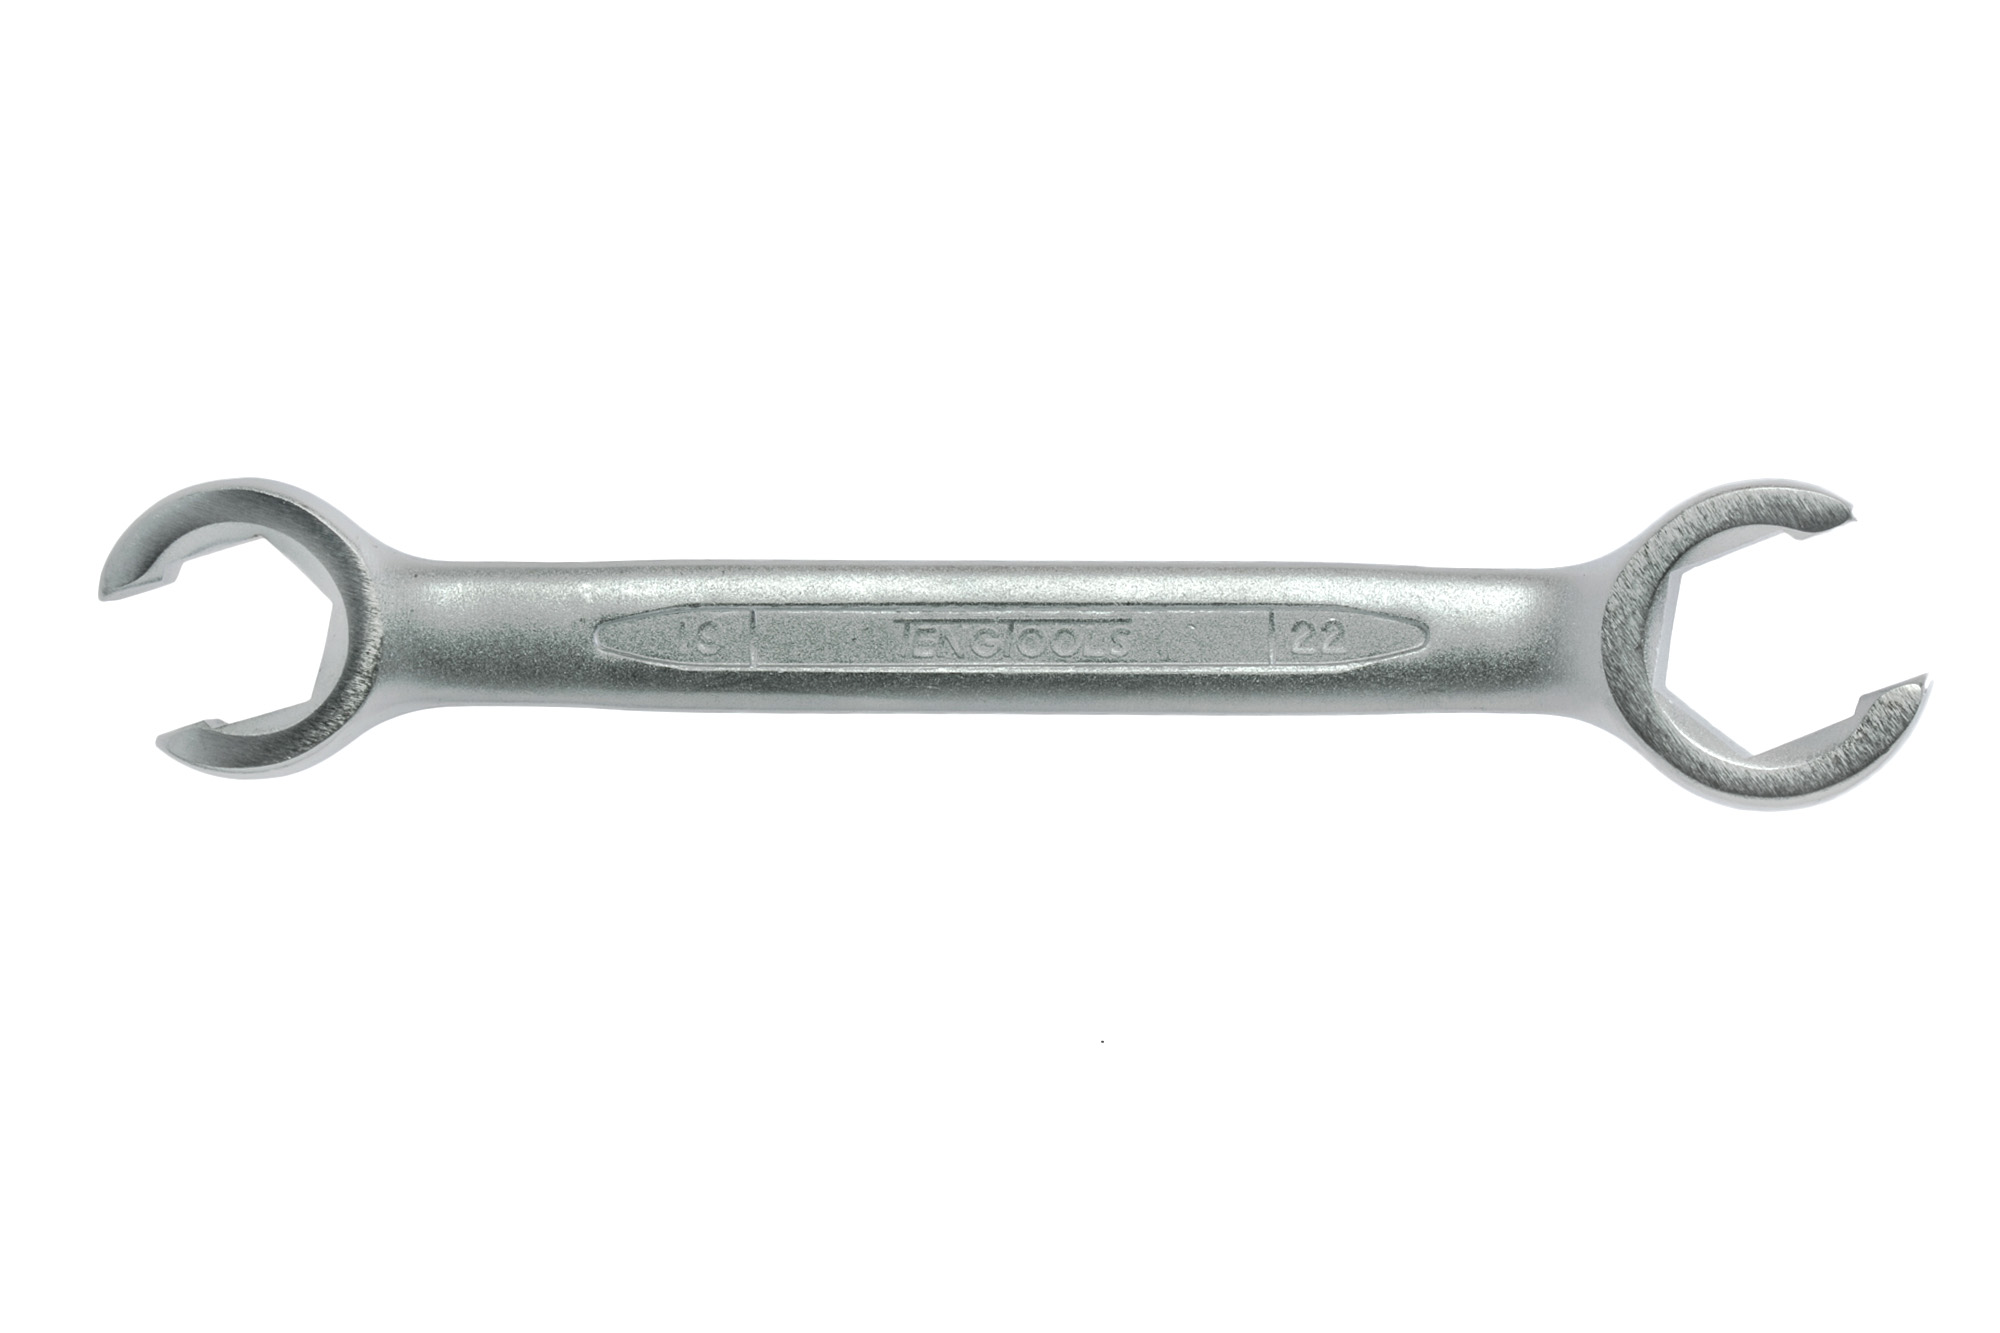 Teng Tools 19 x 22mm Double Flare Nut Wrench - 641922